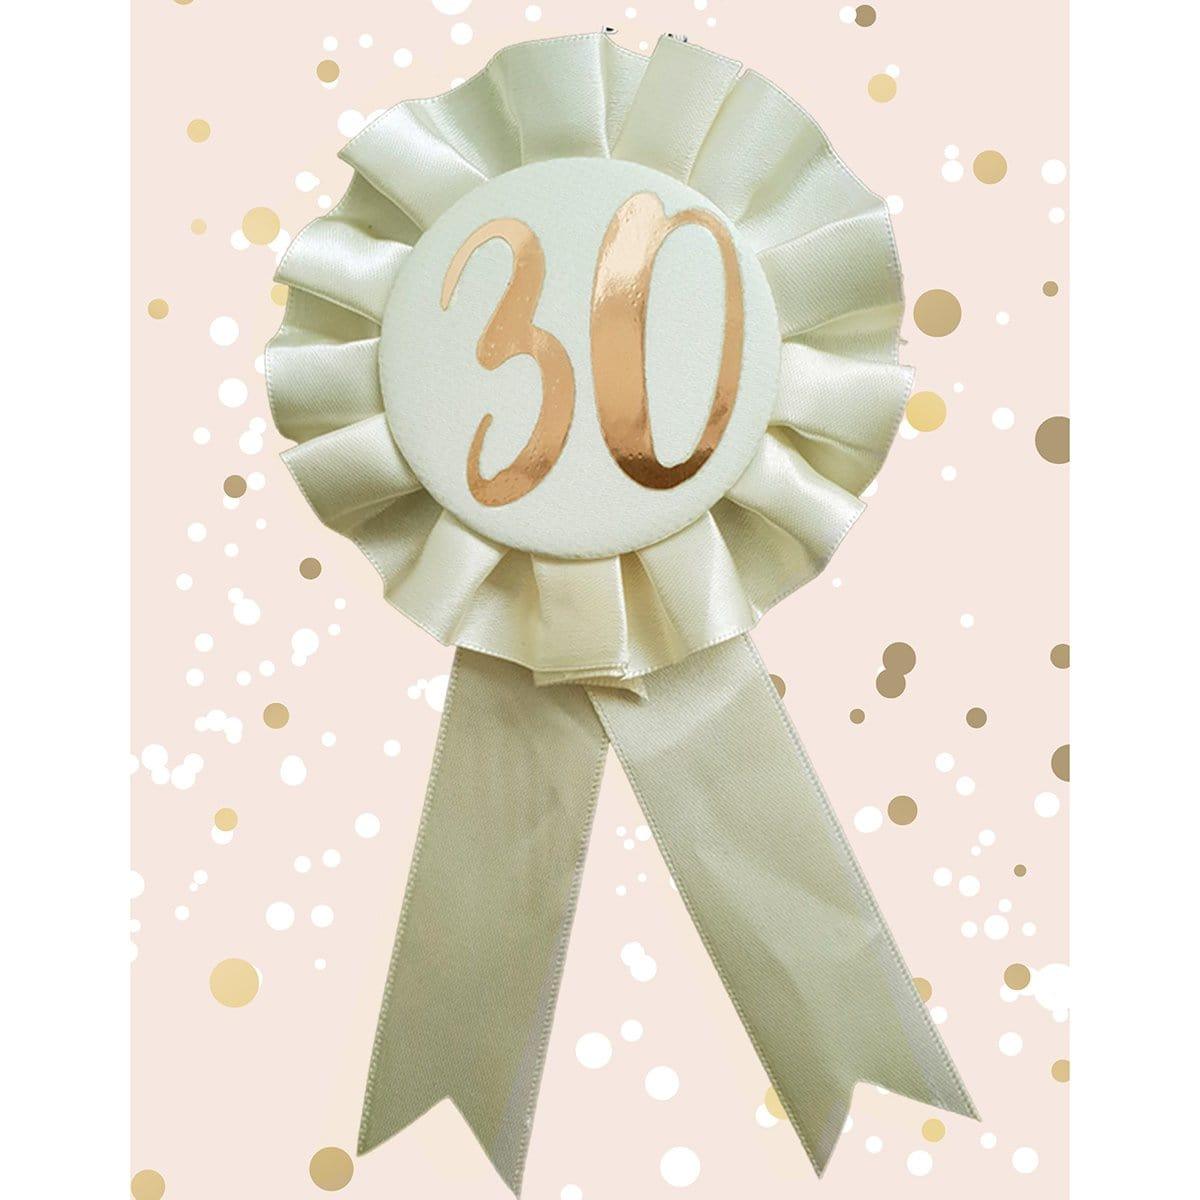 Buy Age Specific Birthday Rosette Badge Rose Gold - 30th sold at Party Expert